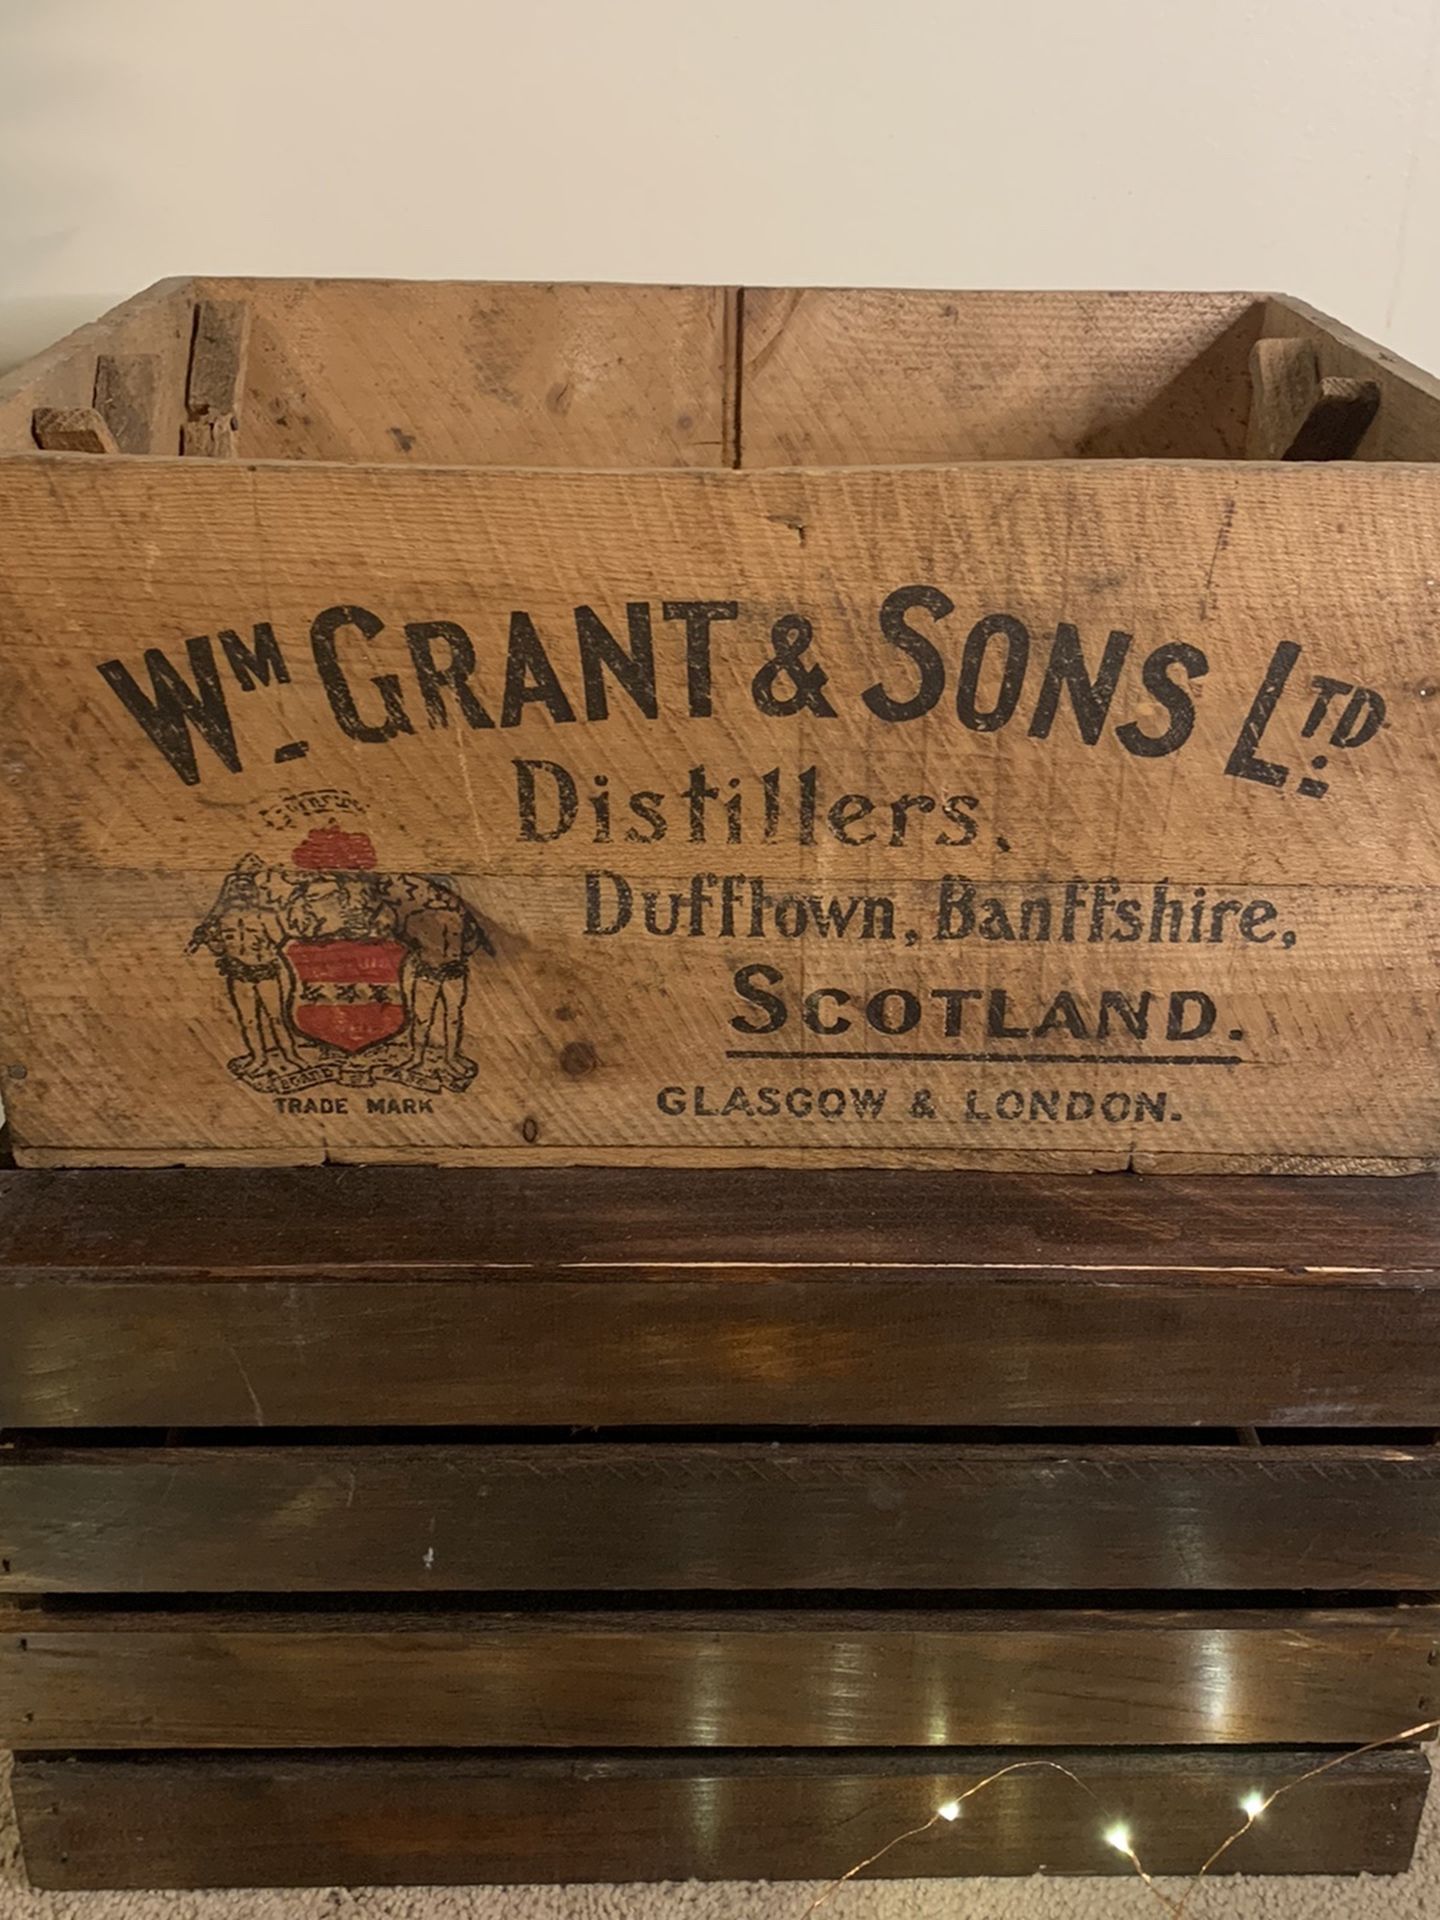 Vintage Wooden Crate | Grants Scotch Whisky From Scotland